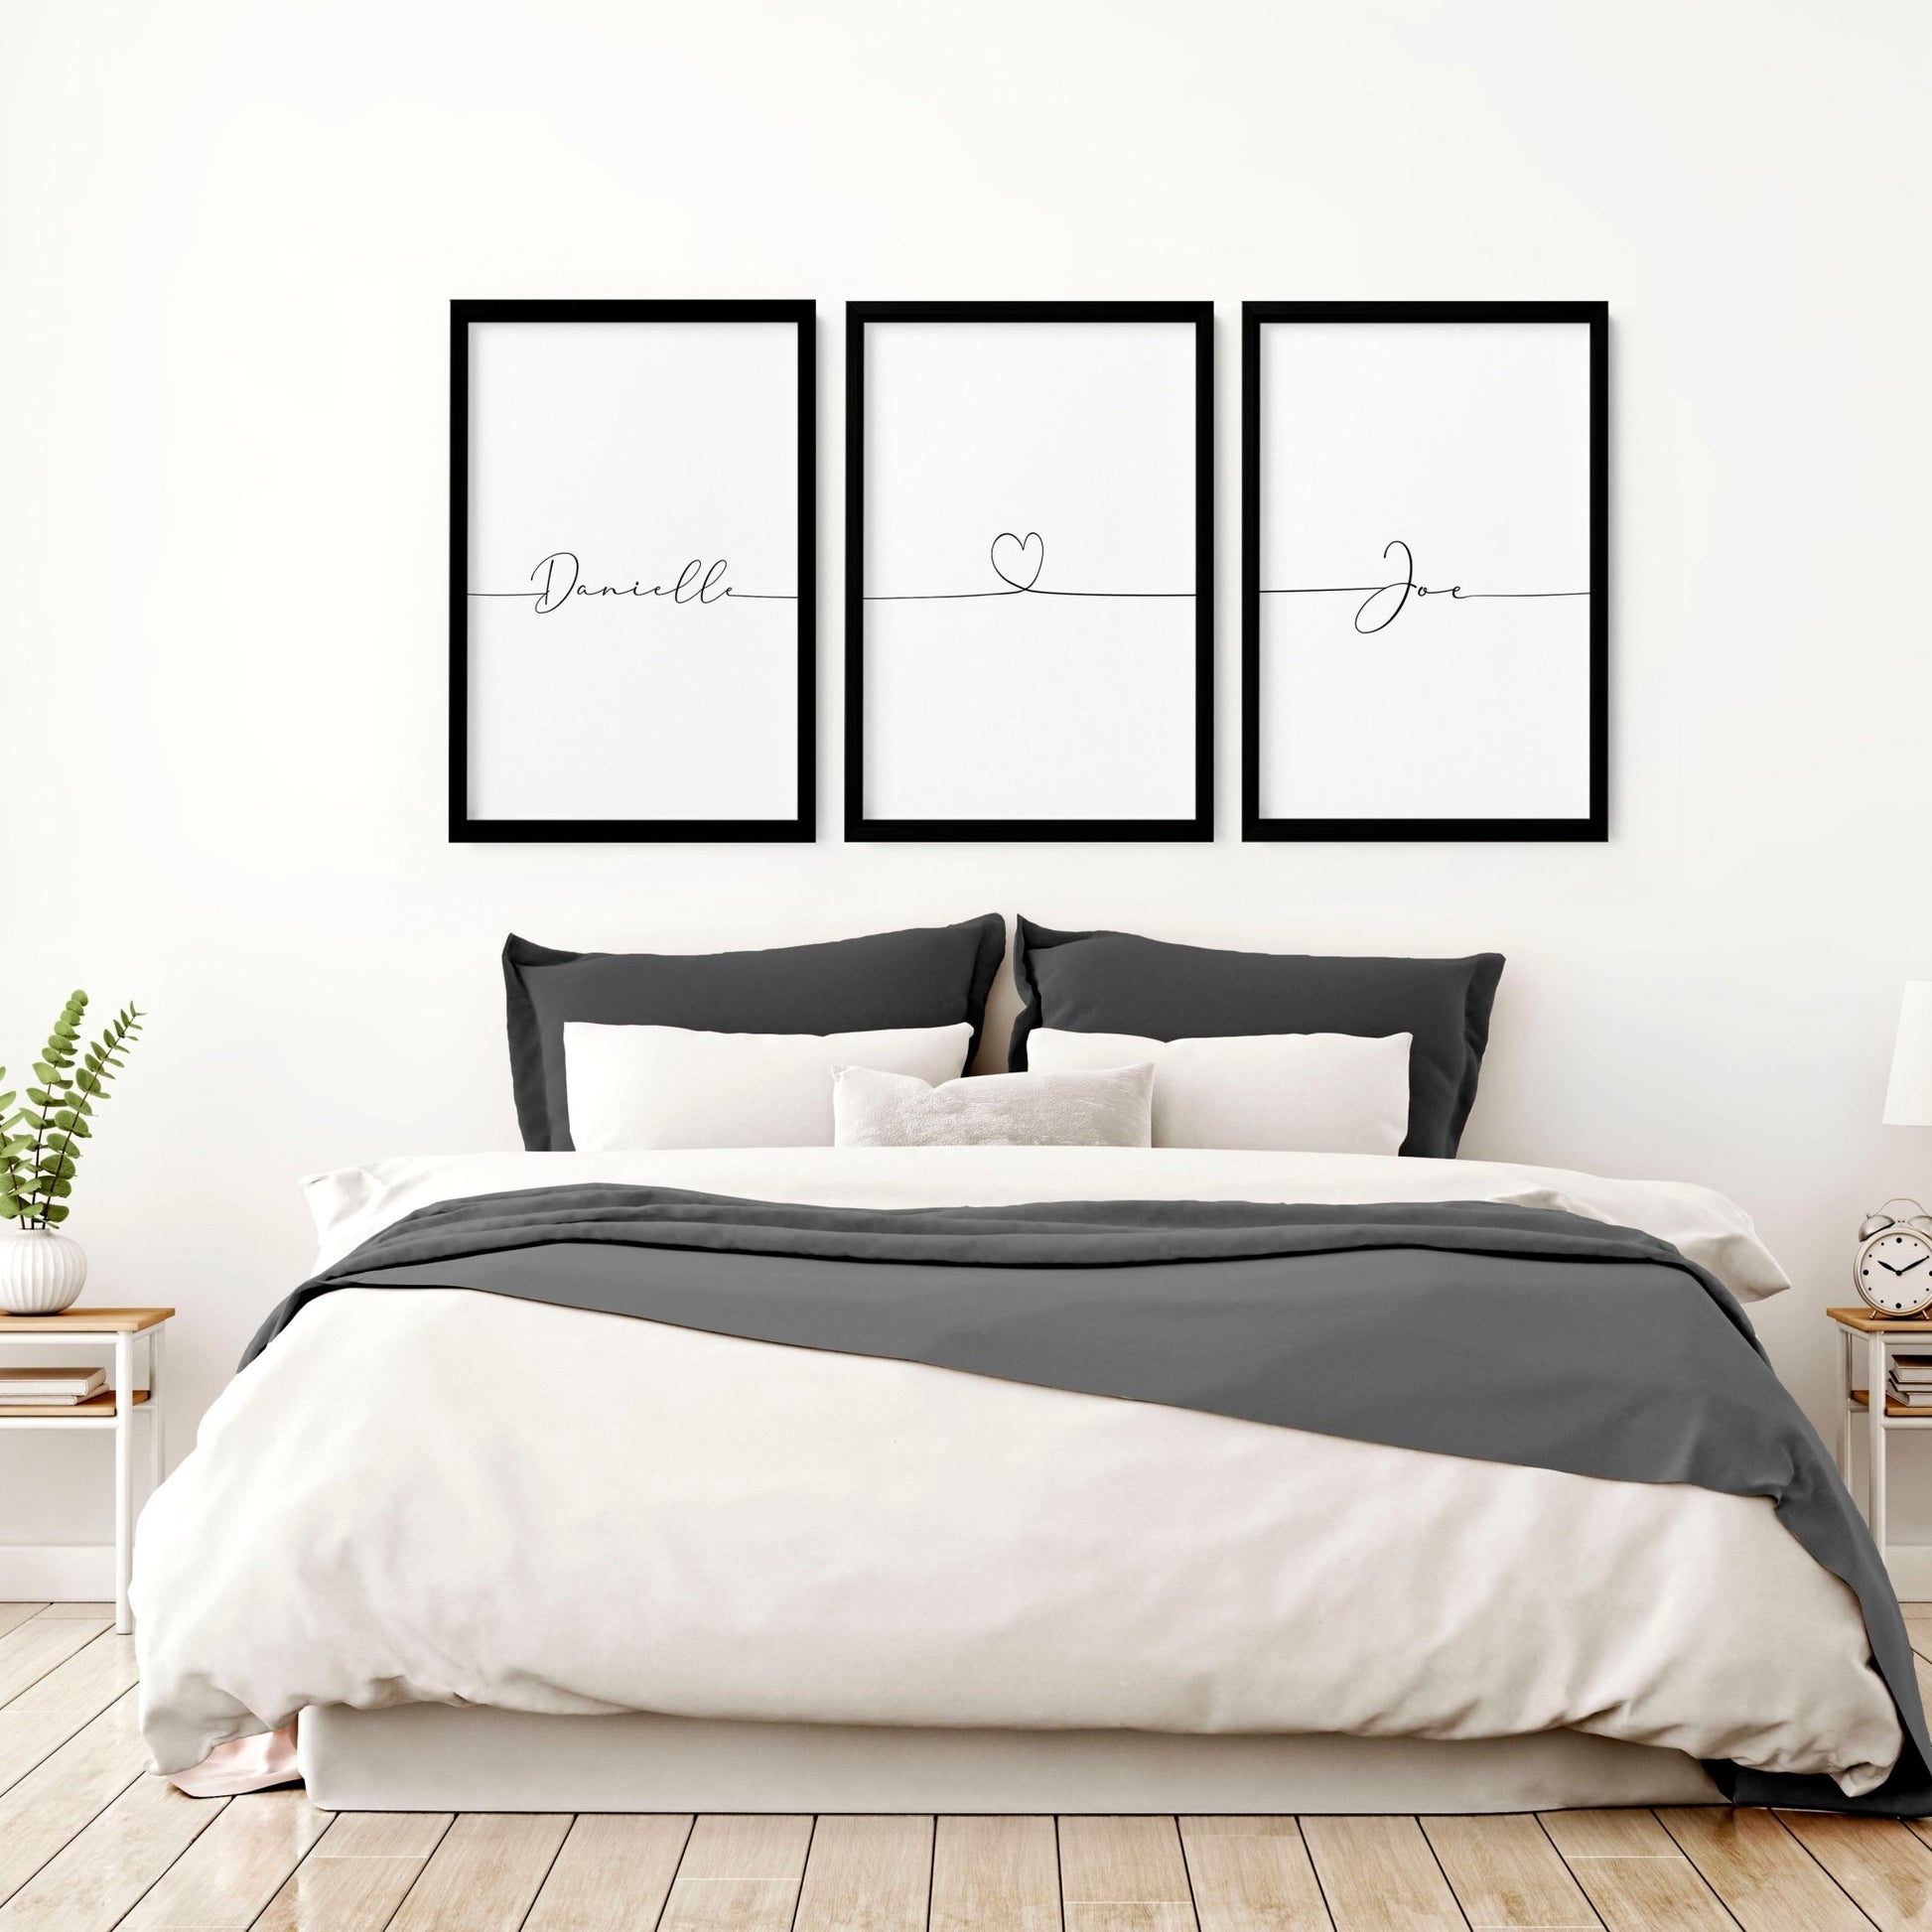 Customized valentines gift | set of 3 wall art prints for Master Bedroom - About Wall Art